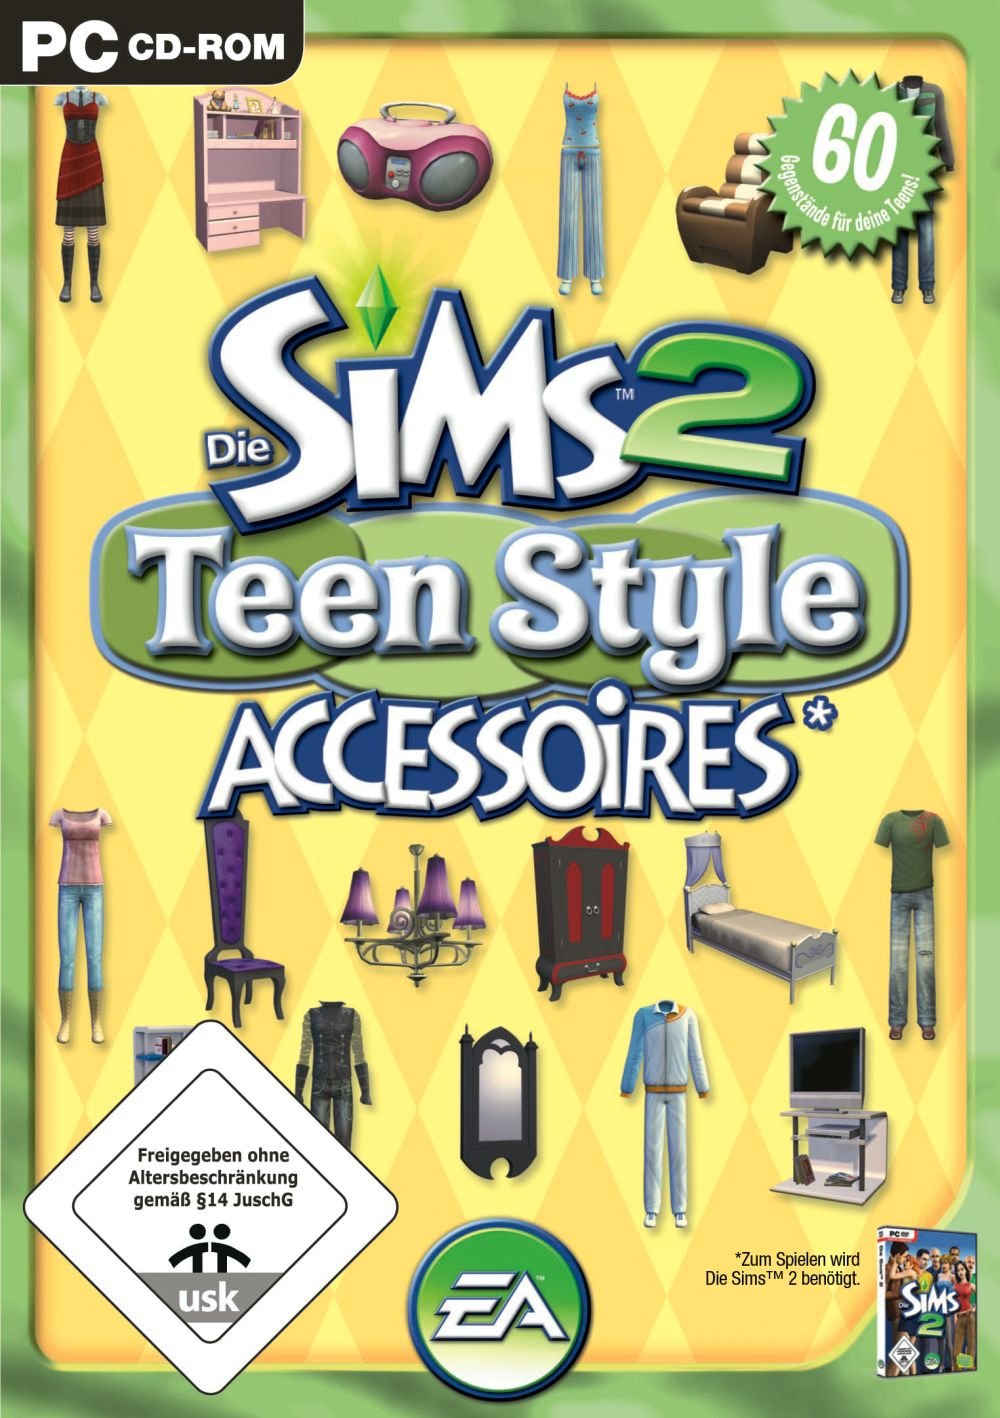 Die-Sims-2-Teen-Style-Accessoires-Add-On